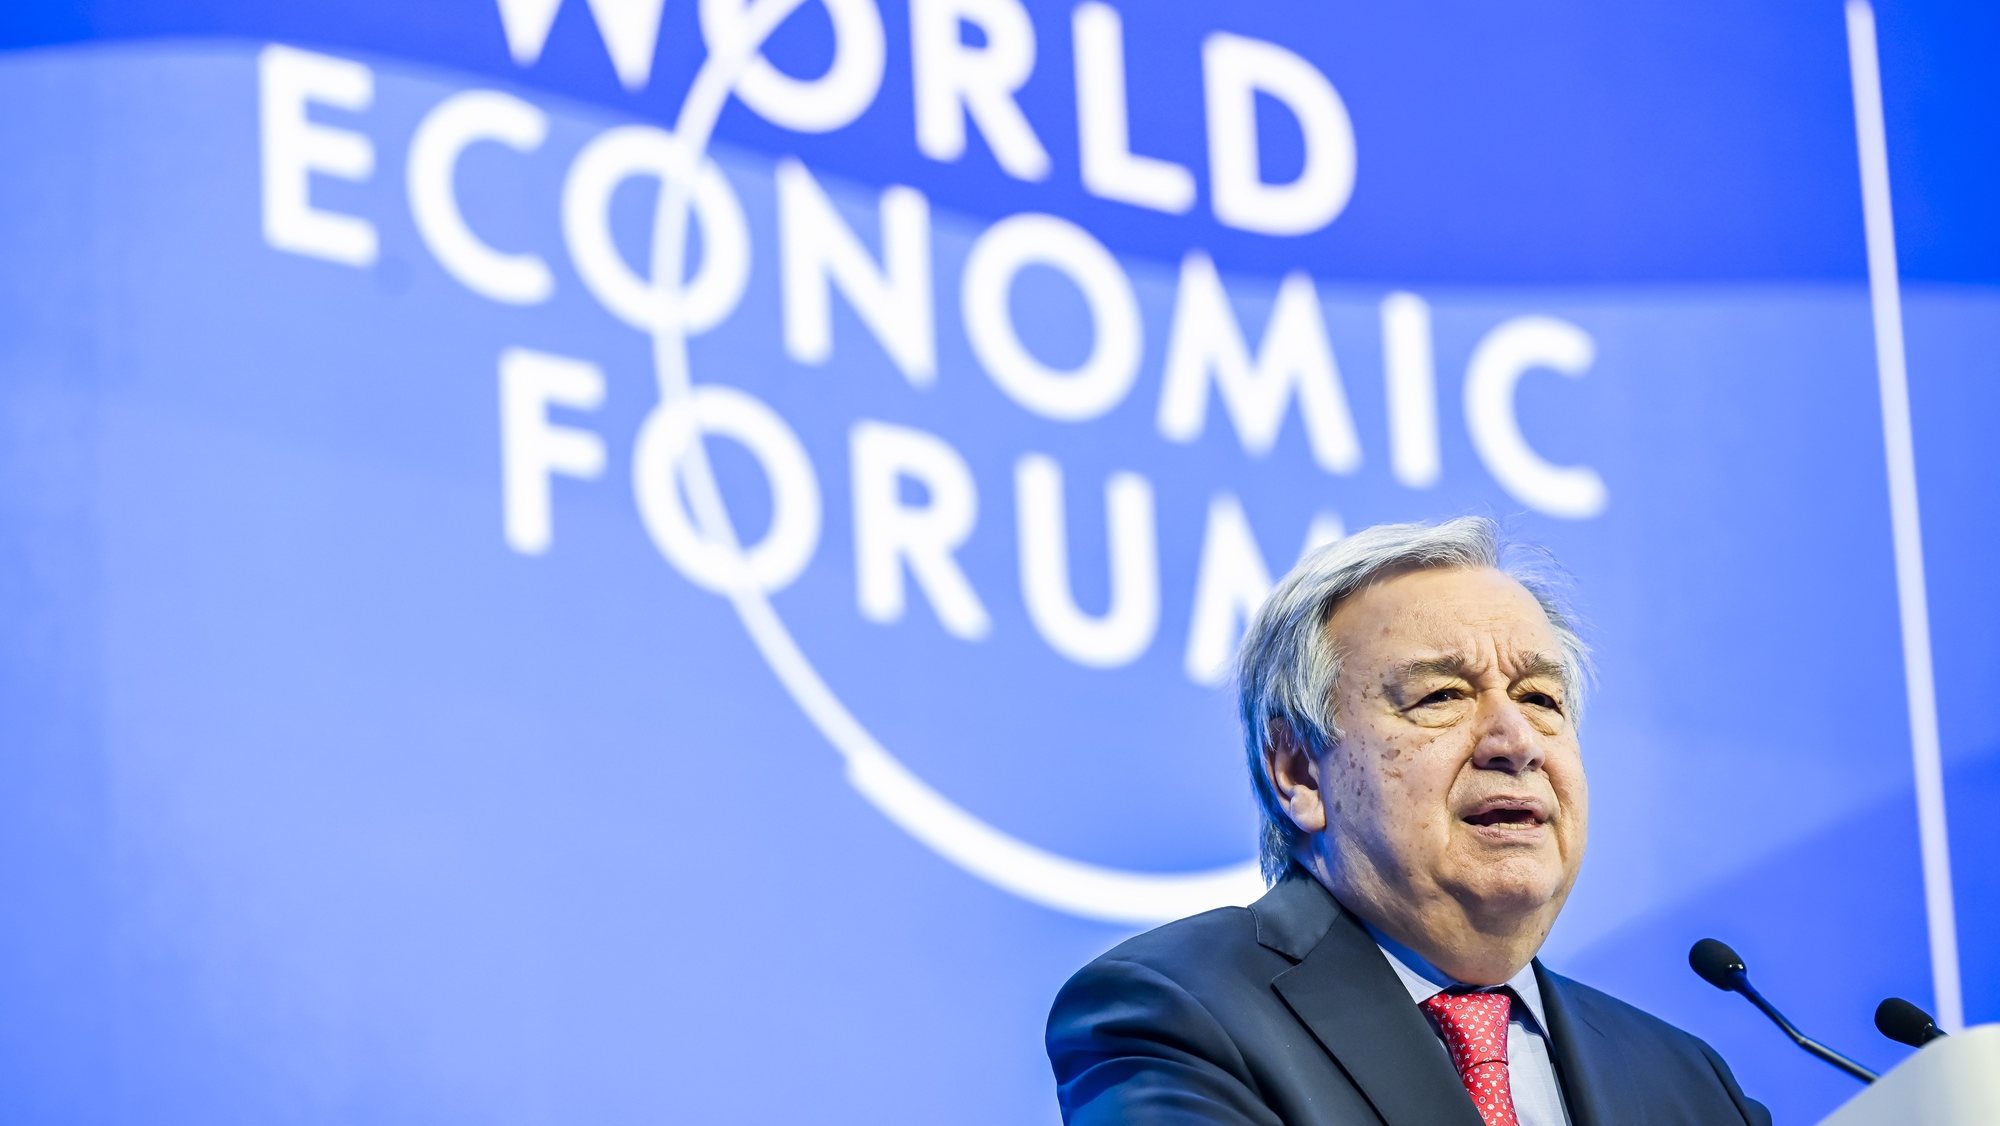 epa10412922 United Nations Secretary-General Antonio Guterres speaks during the 53rd annual meeting of the World Economic Forum, WEF, in Davos, Switzerland, 18 January 2023. The meeting brings together entrepreneurs, scientists, corporate and political leaders in Davos under the topic &#039;Cooperation in a Fragmented World&#039; from 16 to 20 January.  EPA/GIAN EHRENZELLER